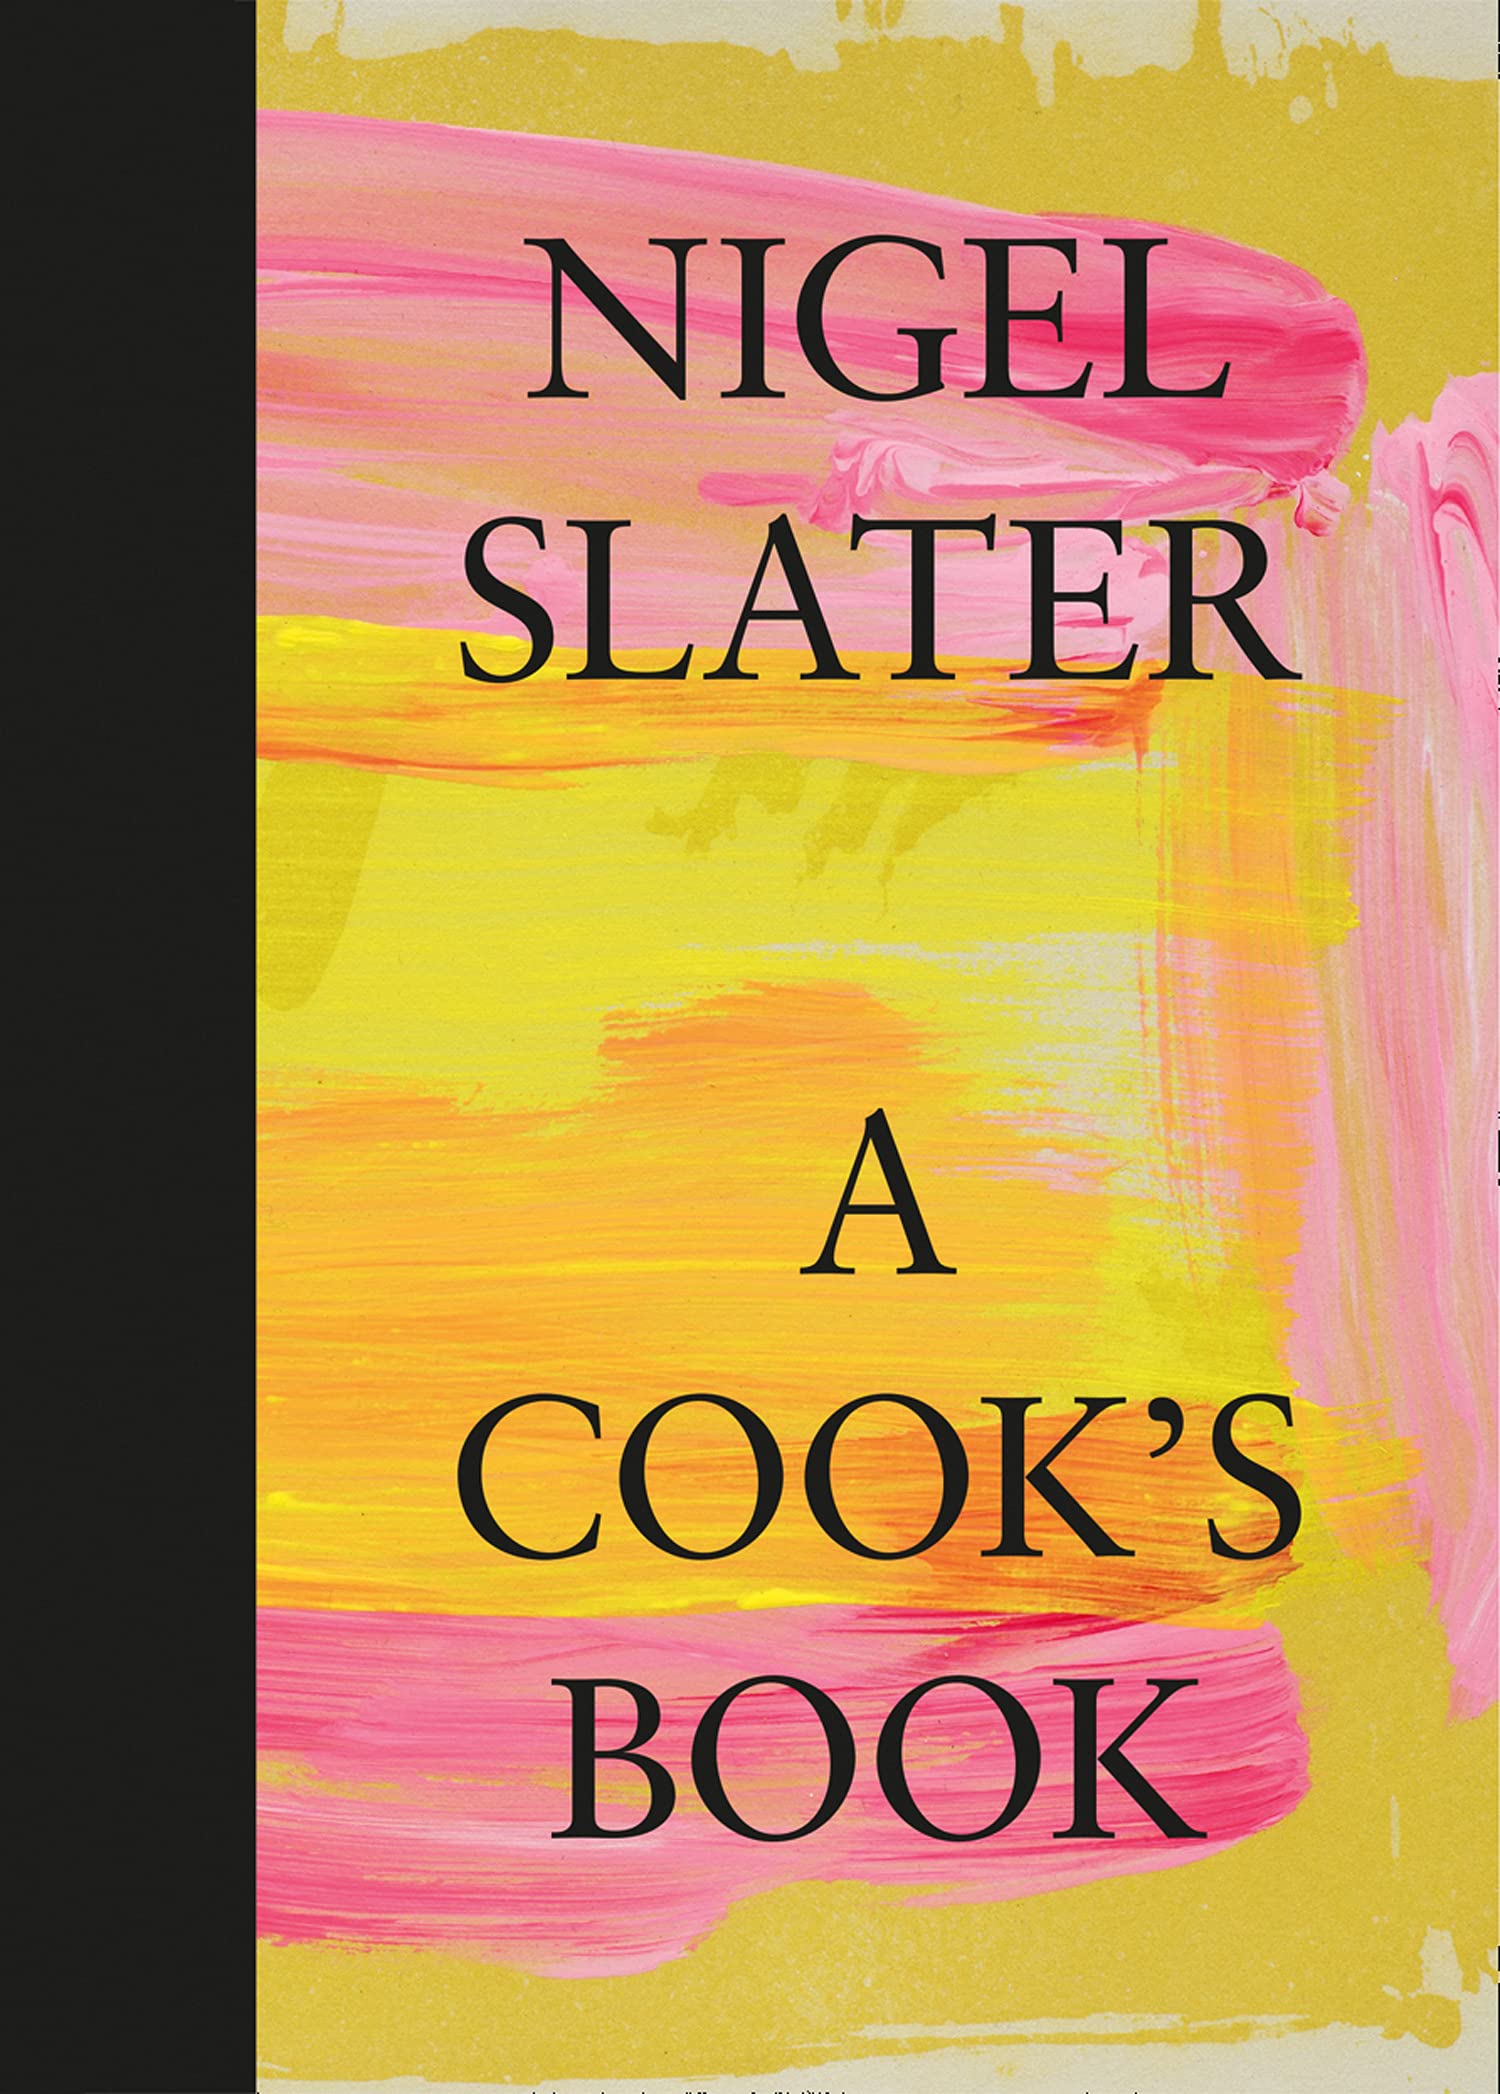 A Cook’s Book: The Essential Nigel Slater with over 200 recipes (Nigel Slater)